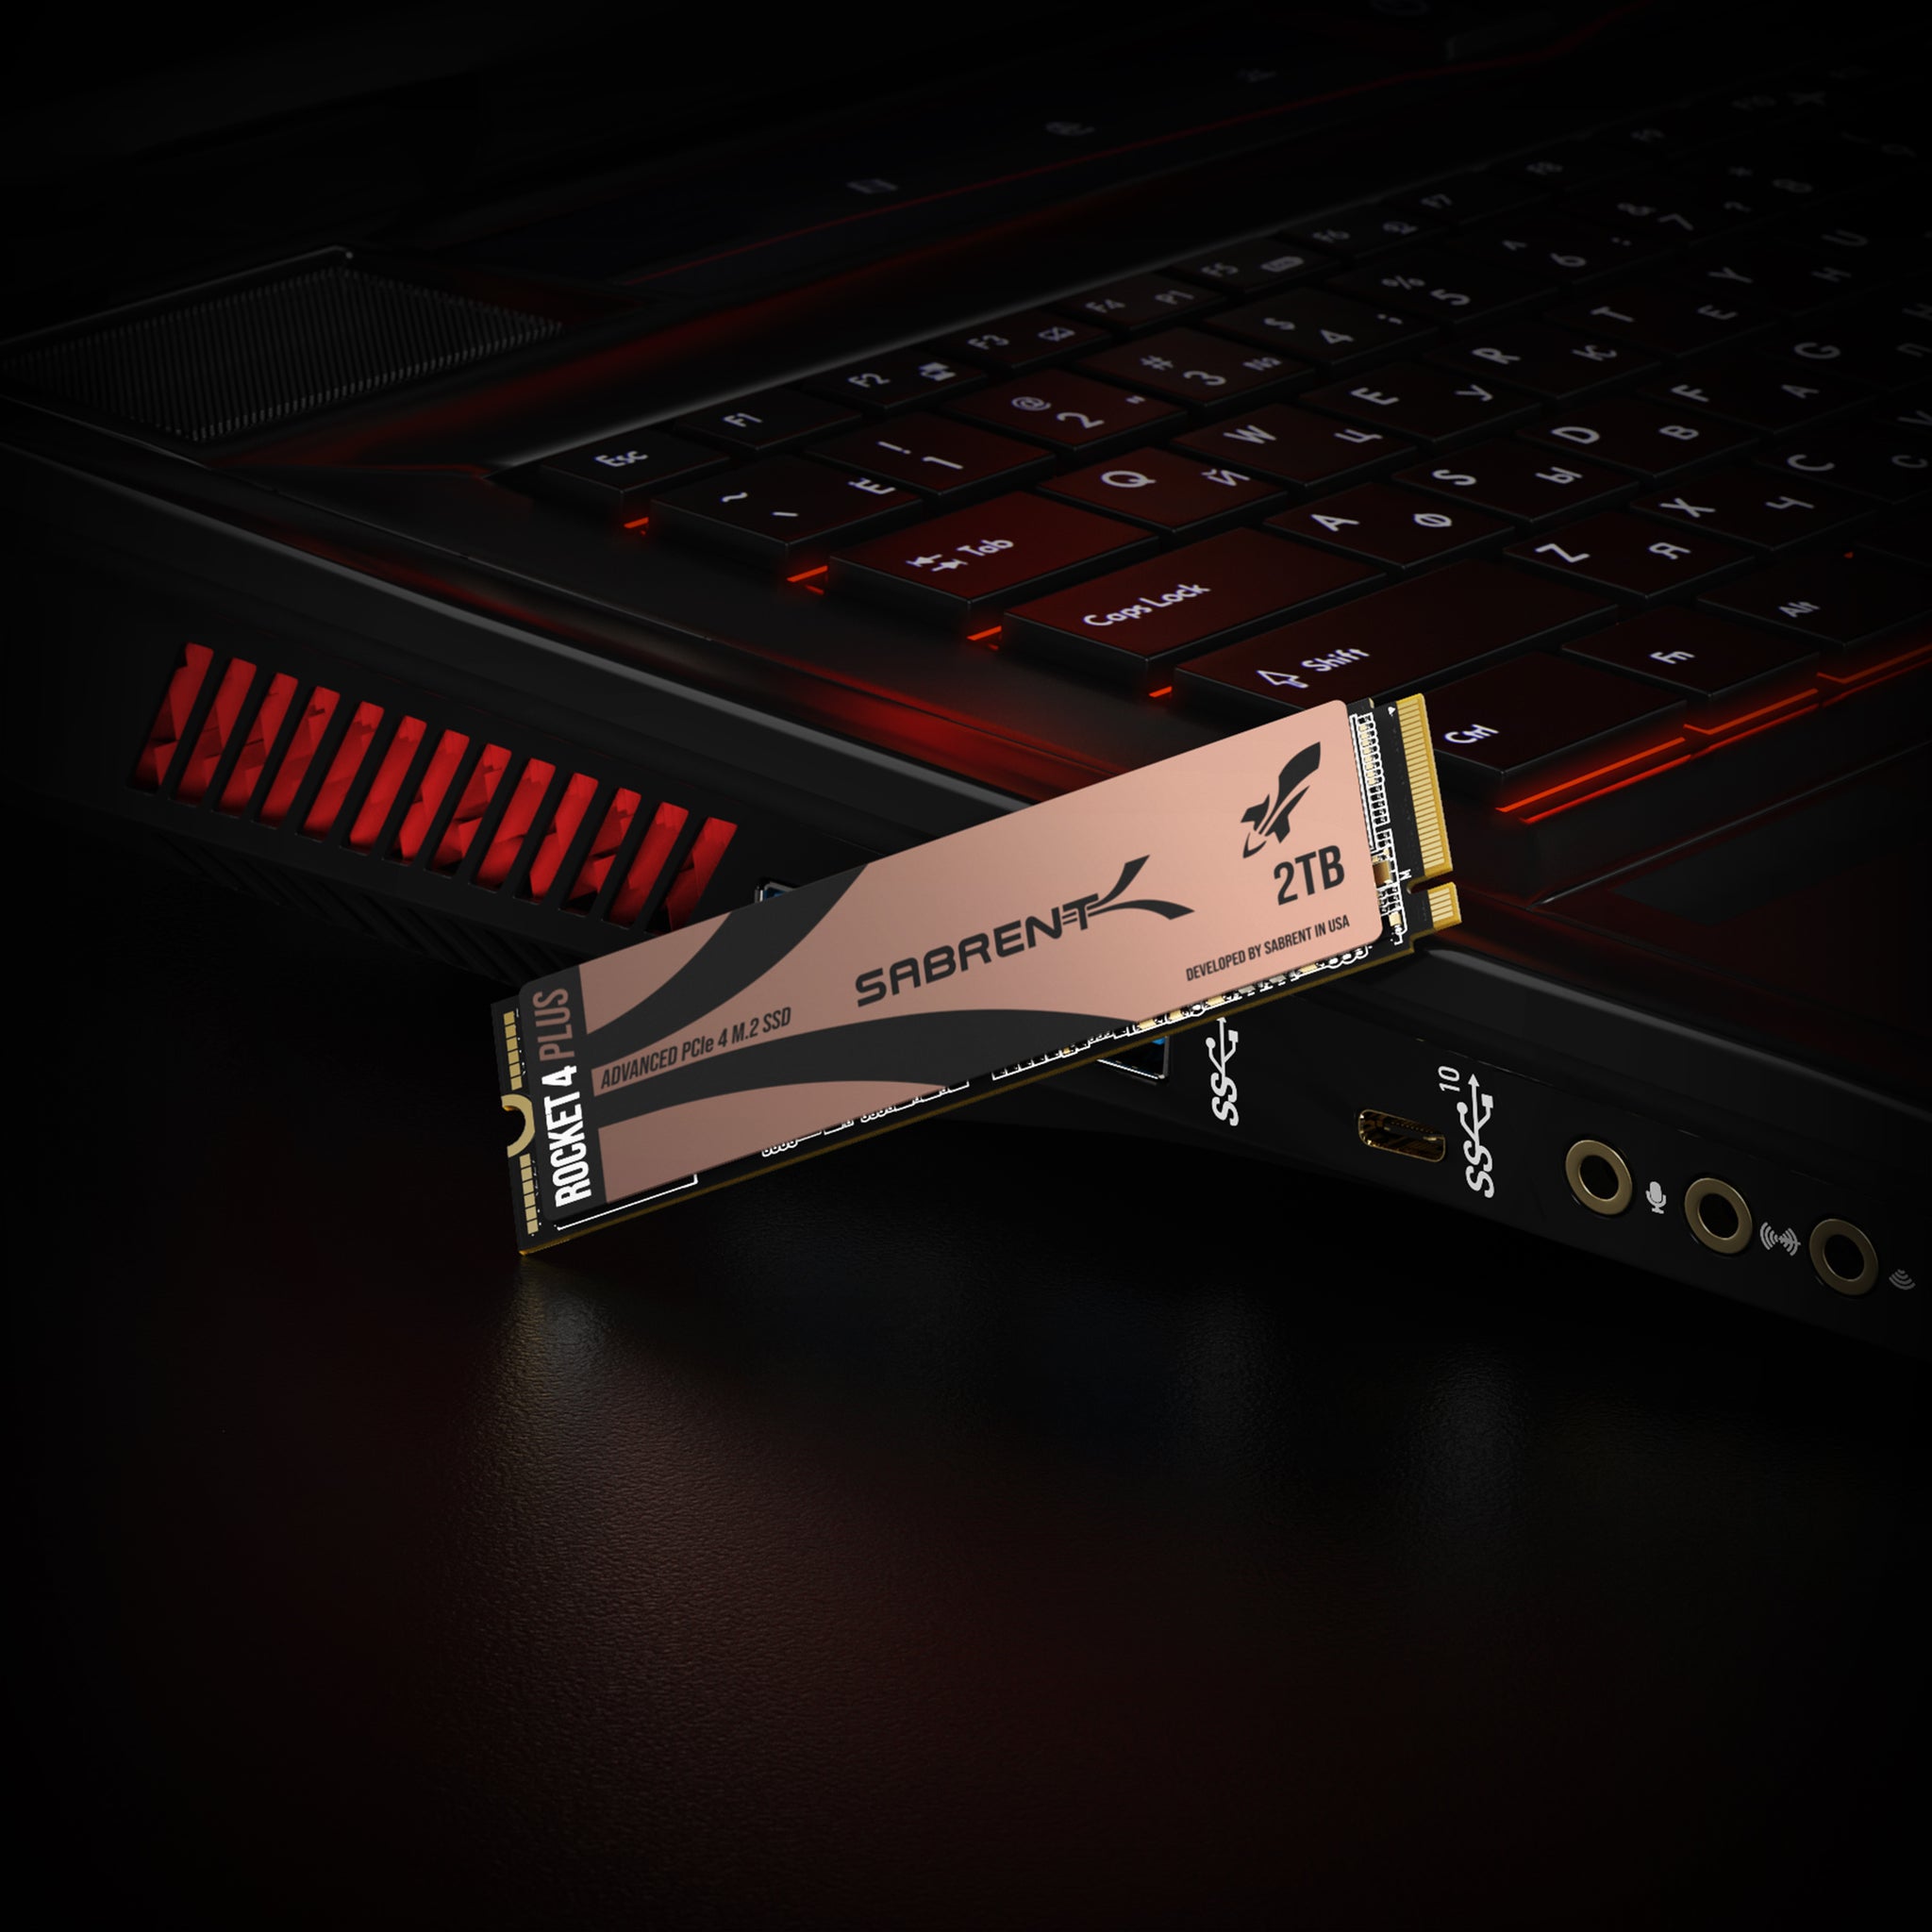 M.2 NVMe Heatsink for the PS5 Console + Rocket 4 Plus SSD - Sabrent